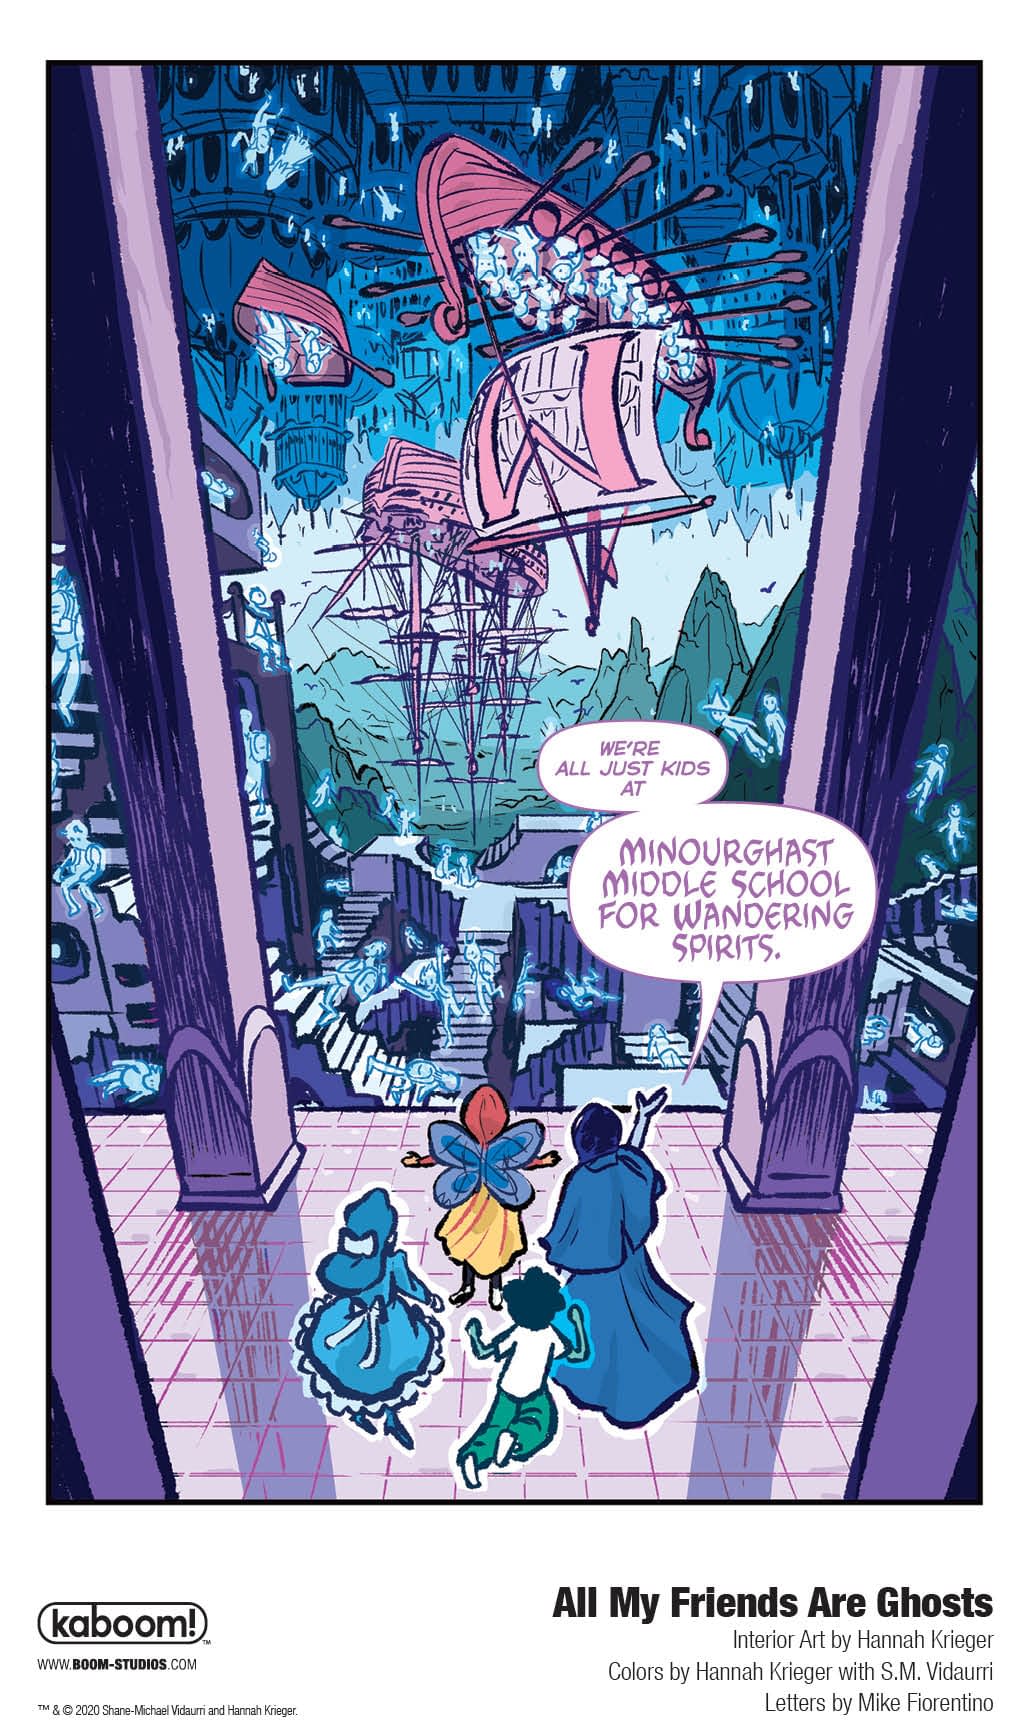 A Foul-Mouthed Phumphing Preview of Middle Grade OGN All My Friends are Ghosts